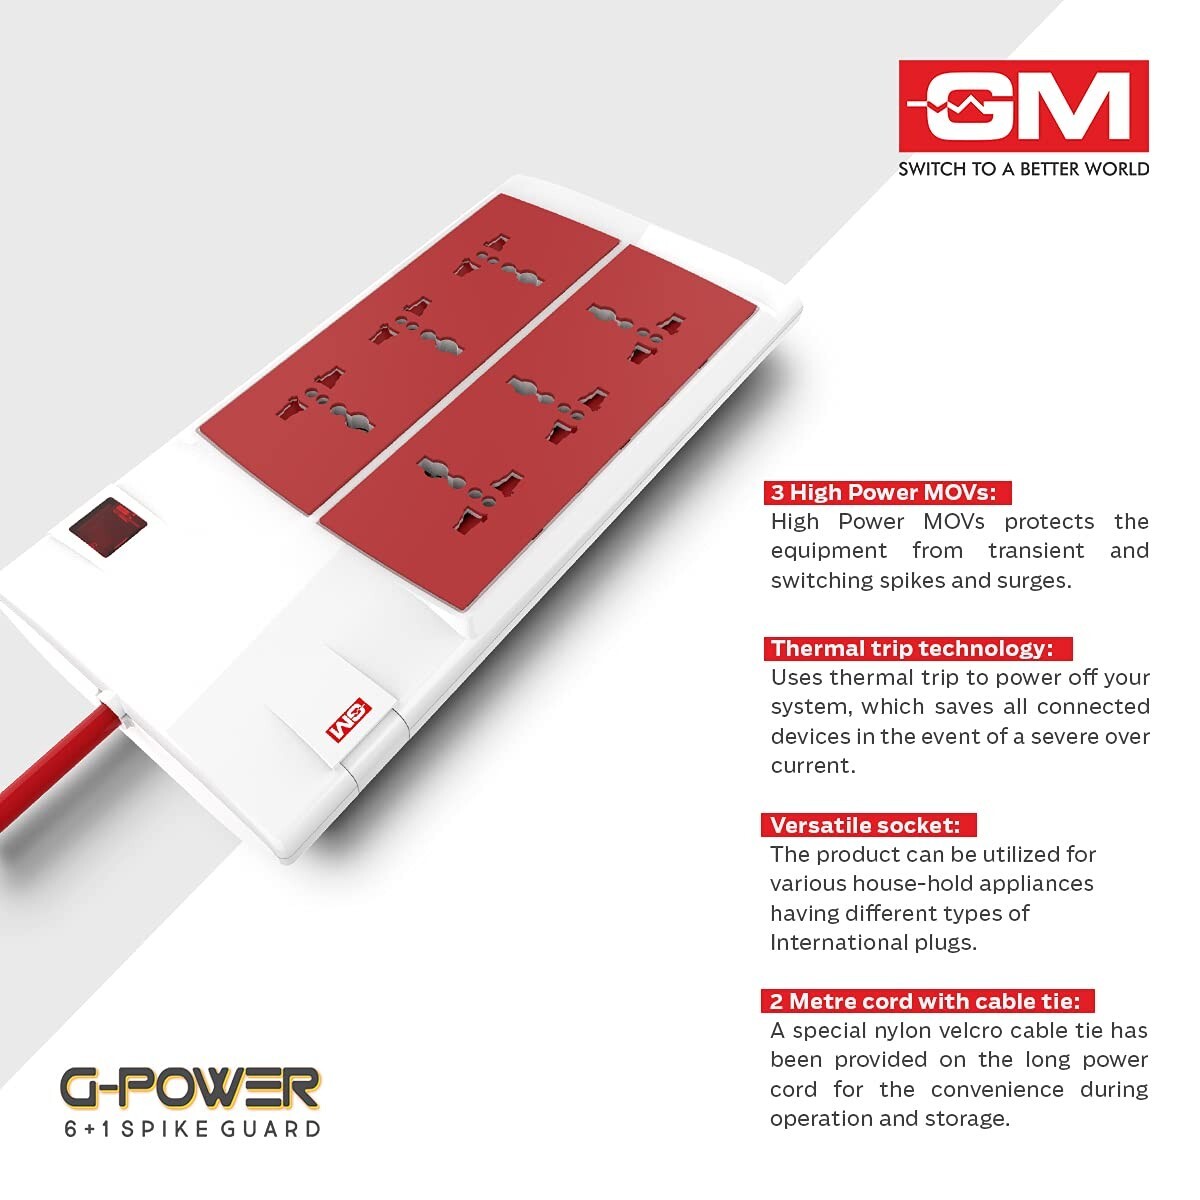 GM G-Power Spike Guard Adapter With Switch 6+1-3059